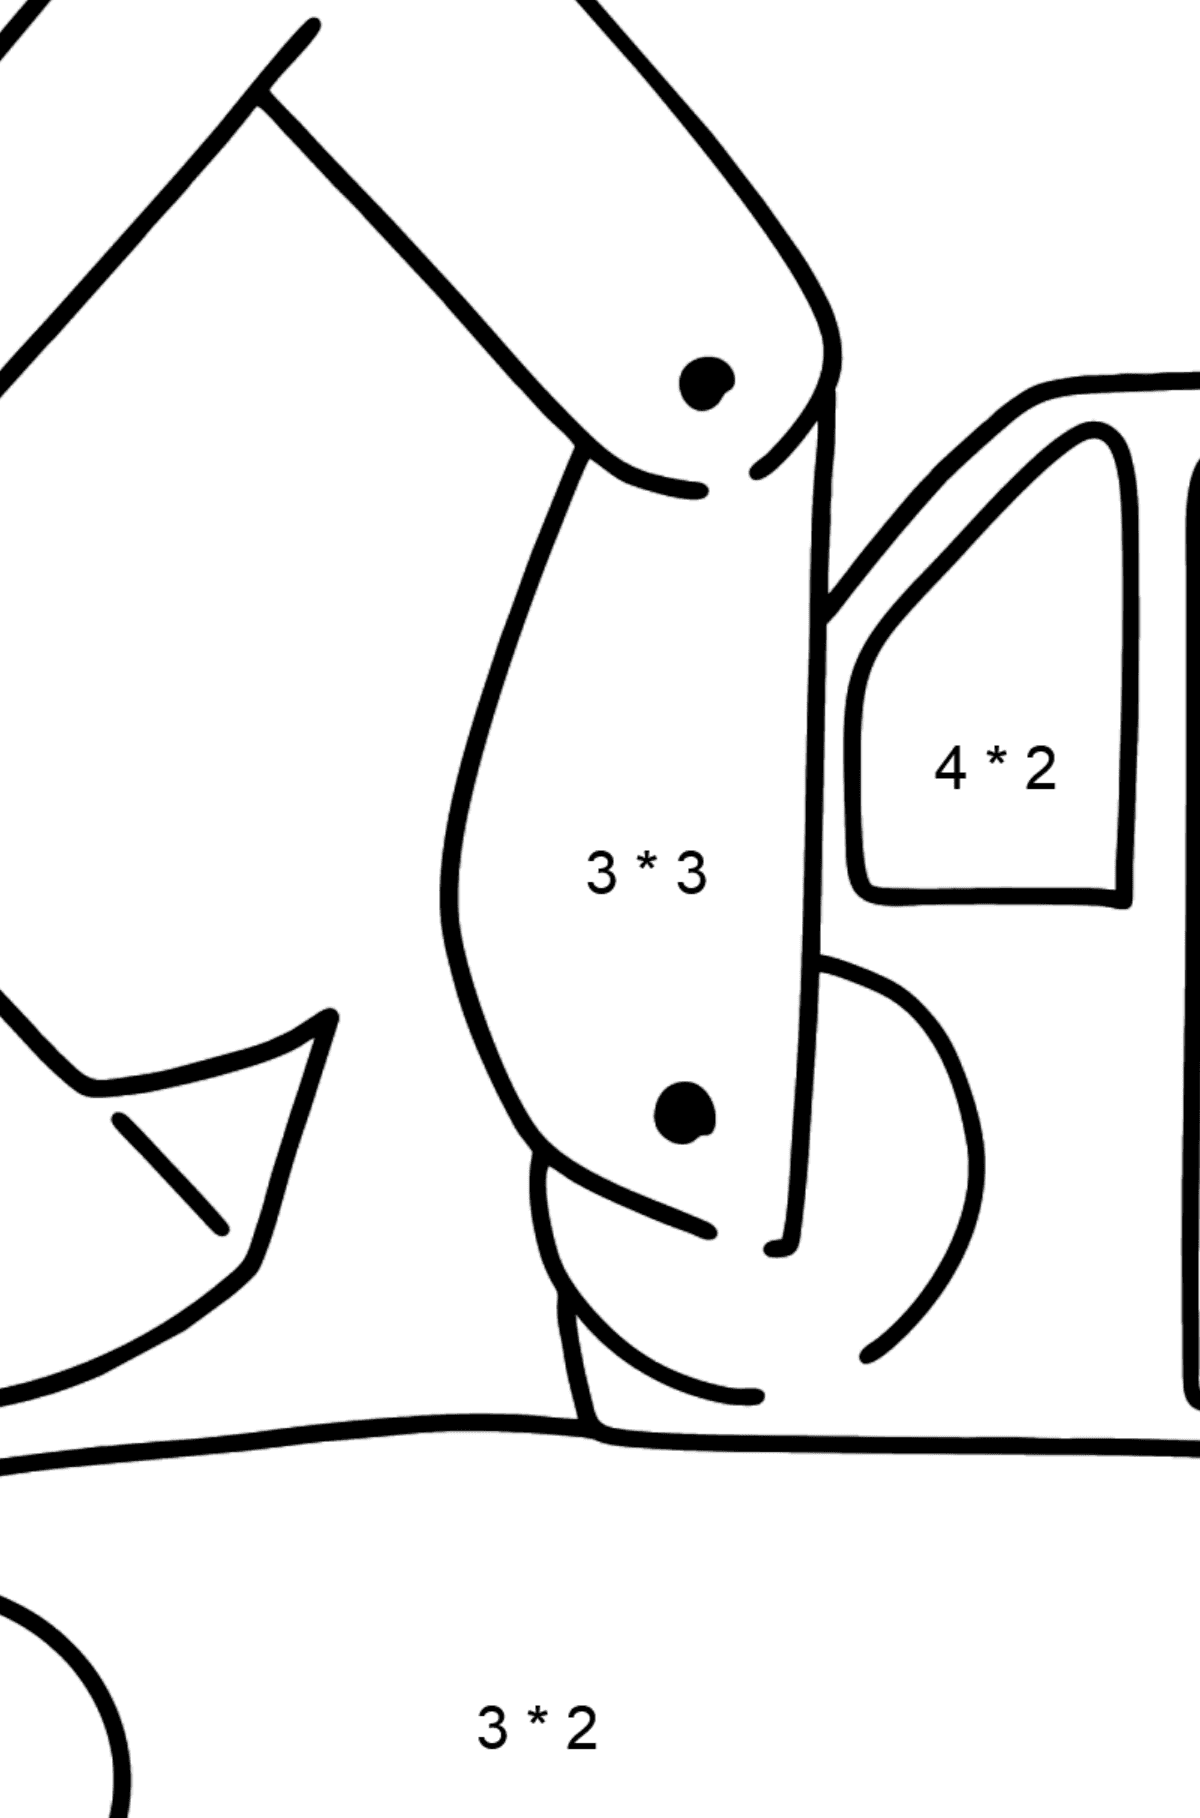 Tractor excavator coloring pages for kids - Math Coloring - Multiplication for Kids